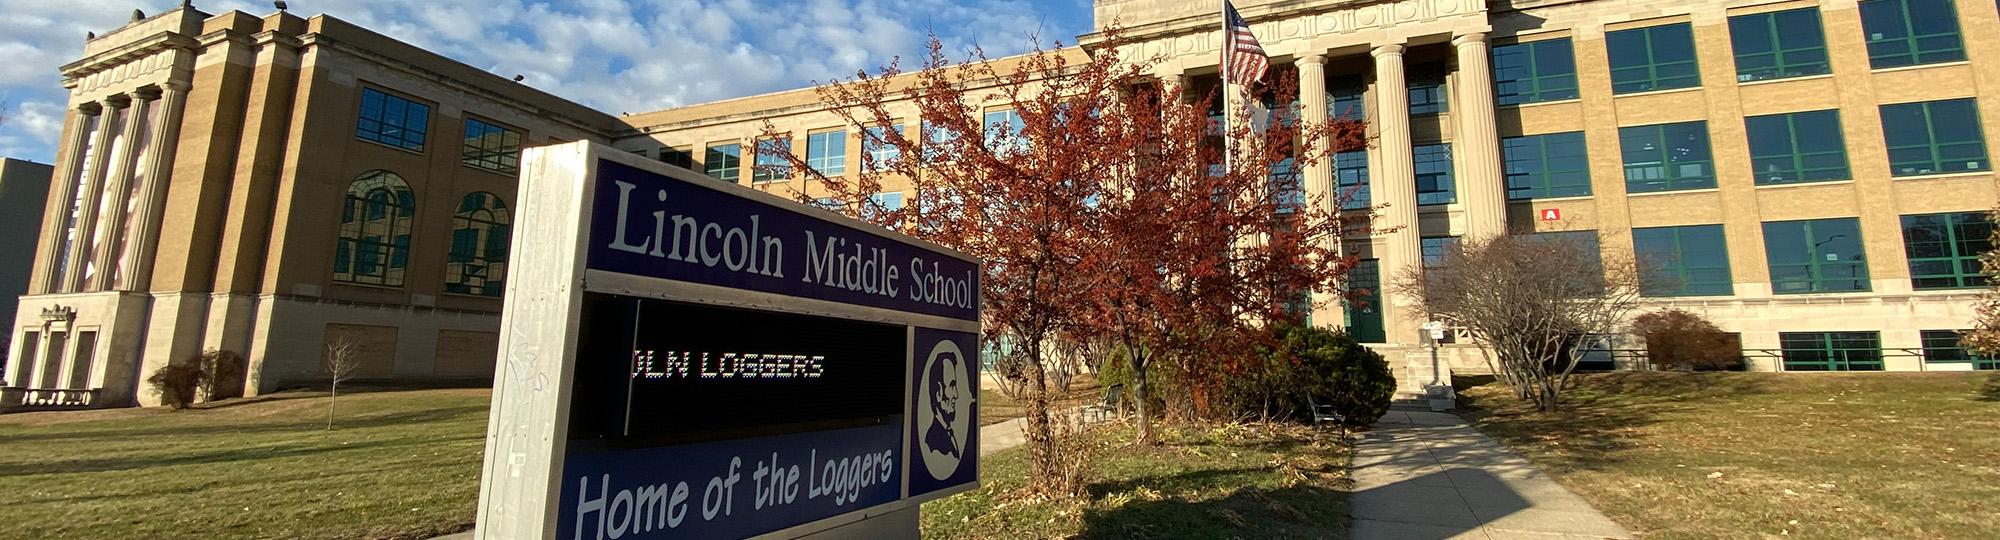 Picture of Lincoln Middle School in Rockford